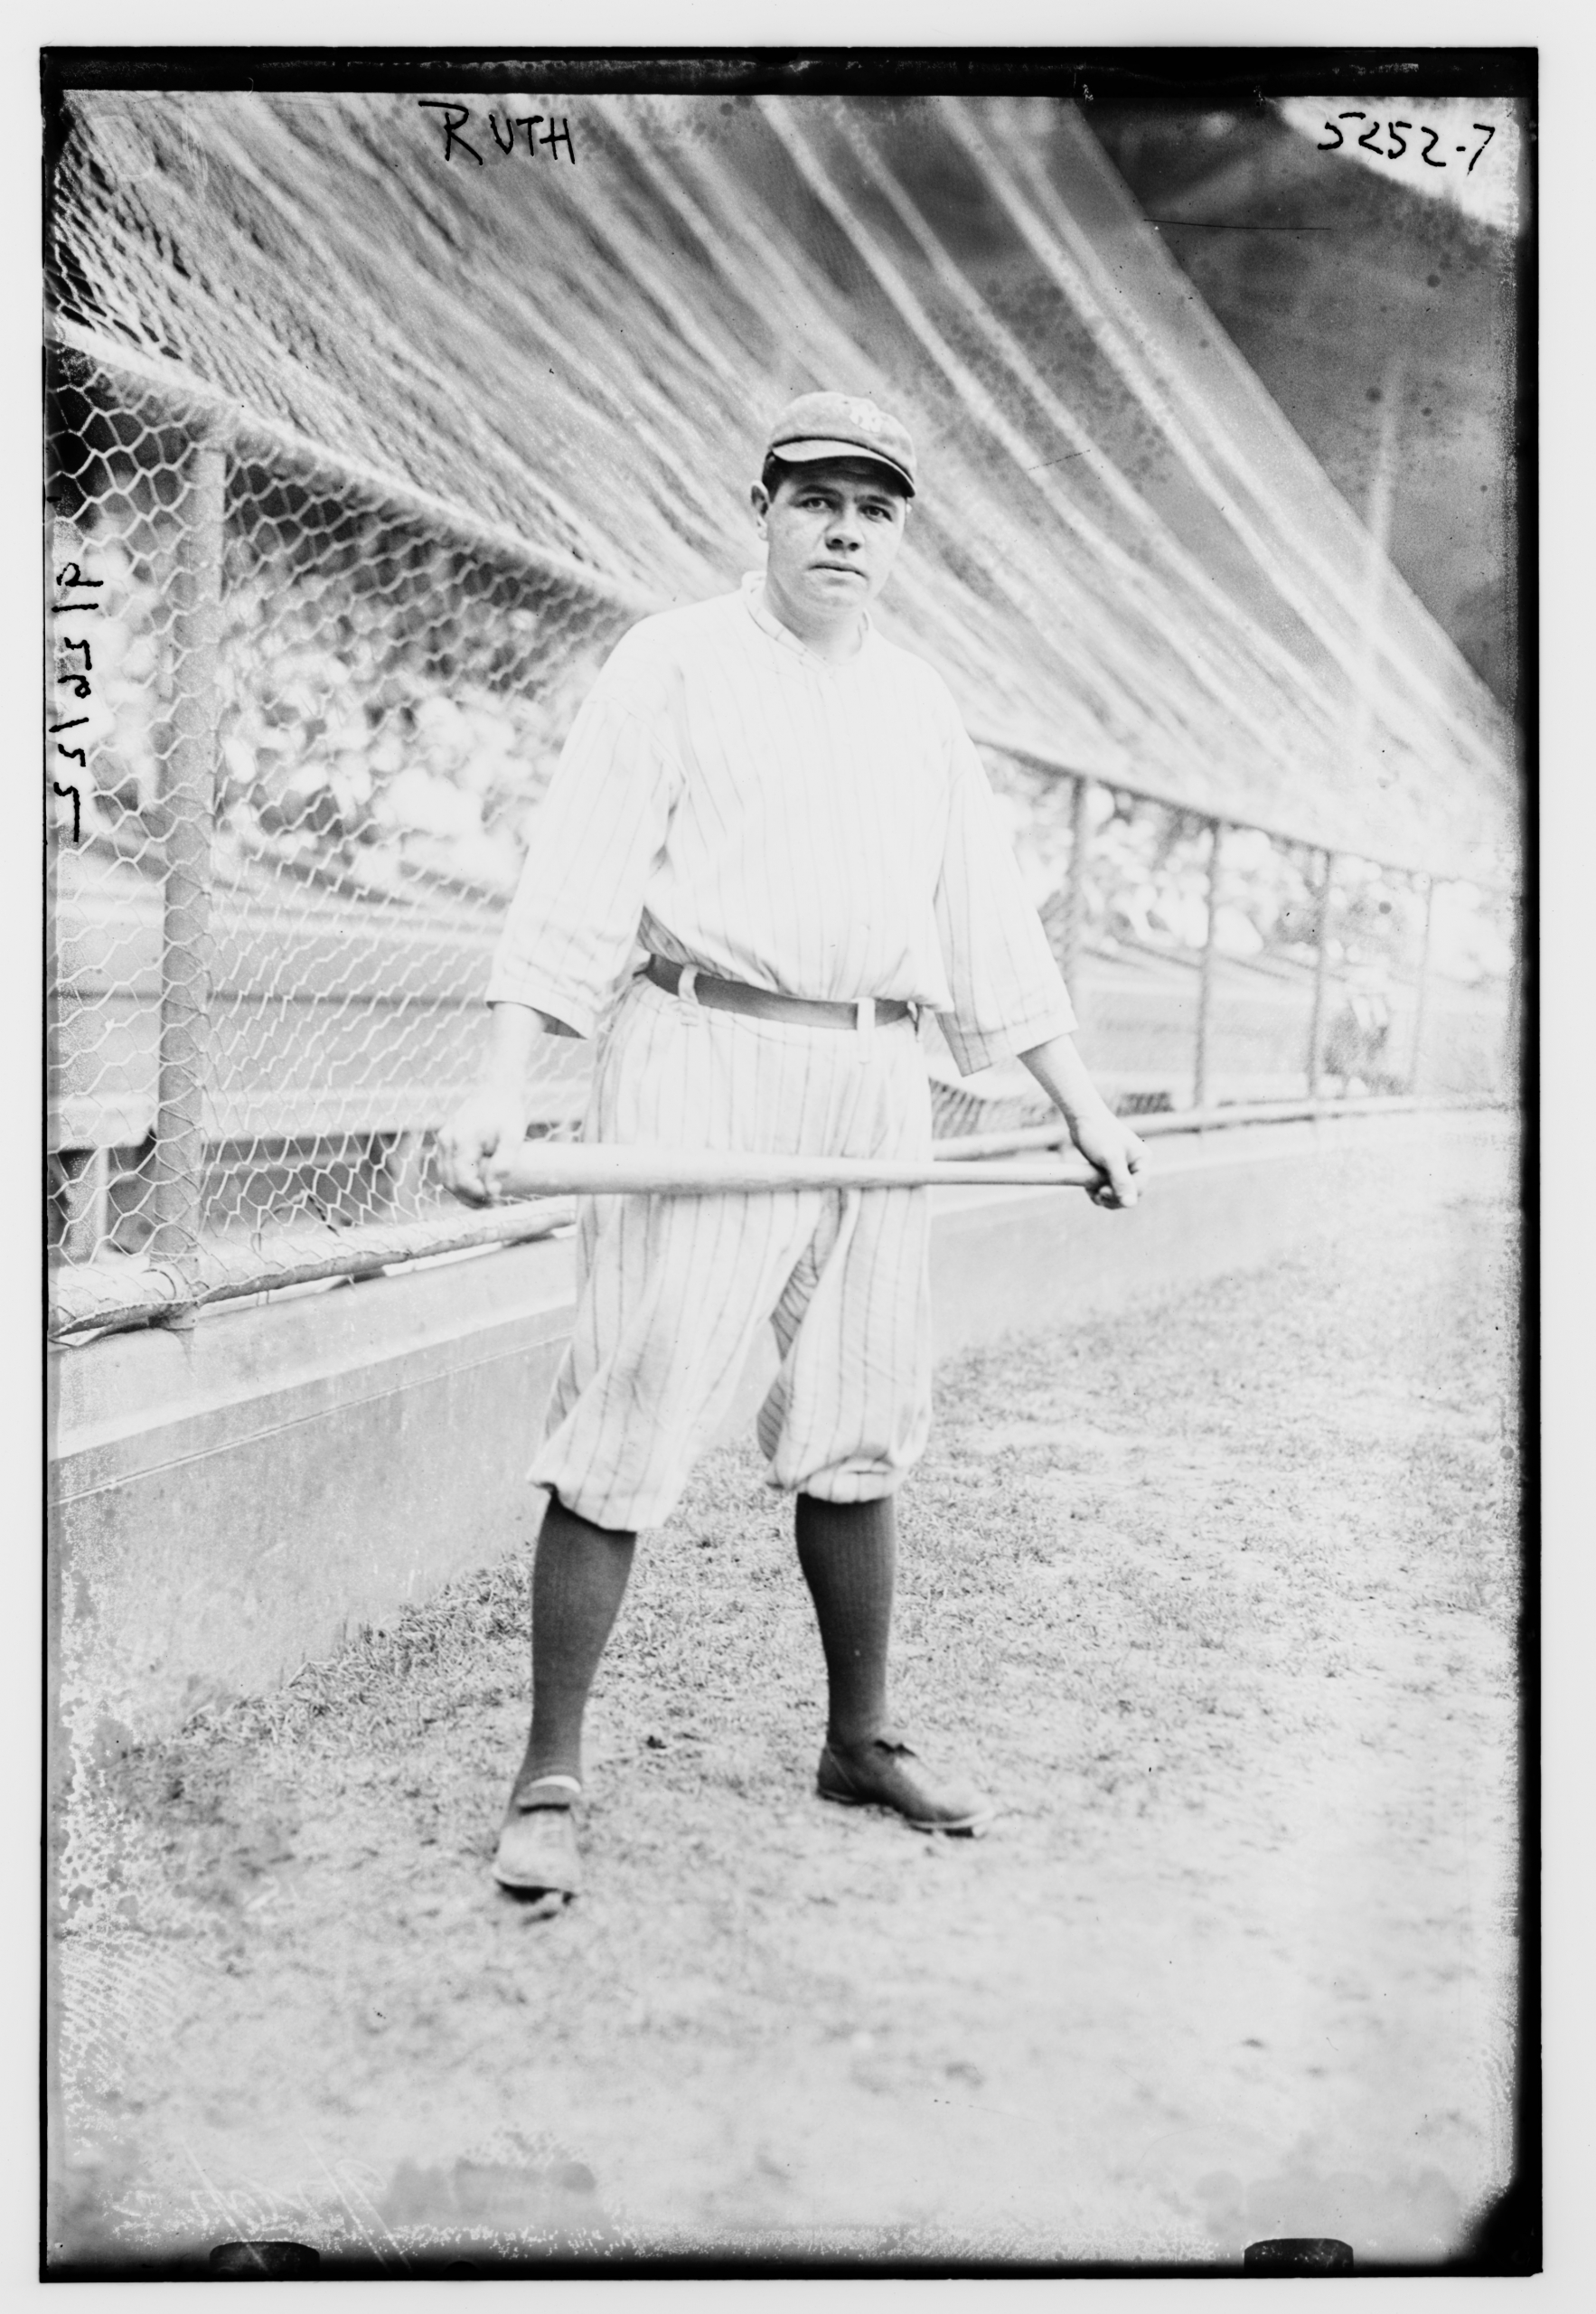 Babe Ruth (LIBRARY OF CONGRESS)